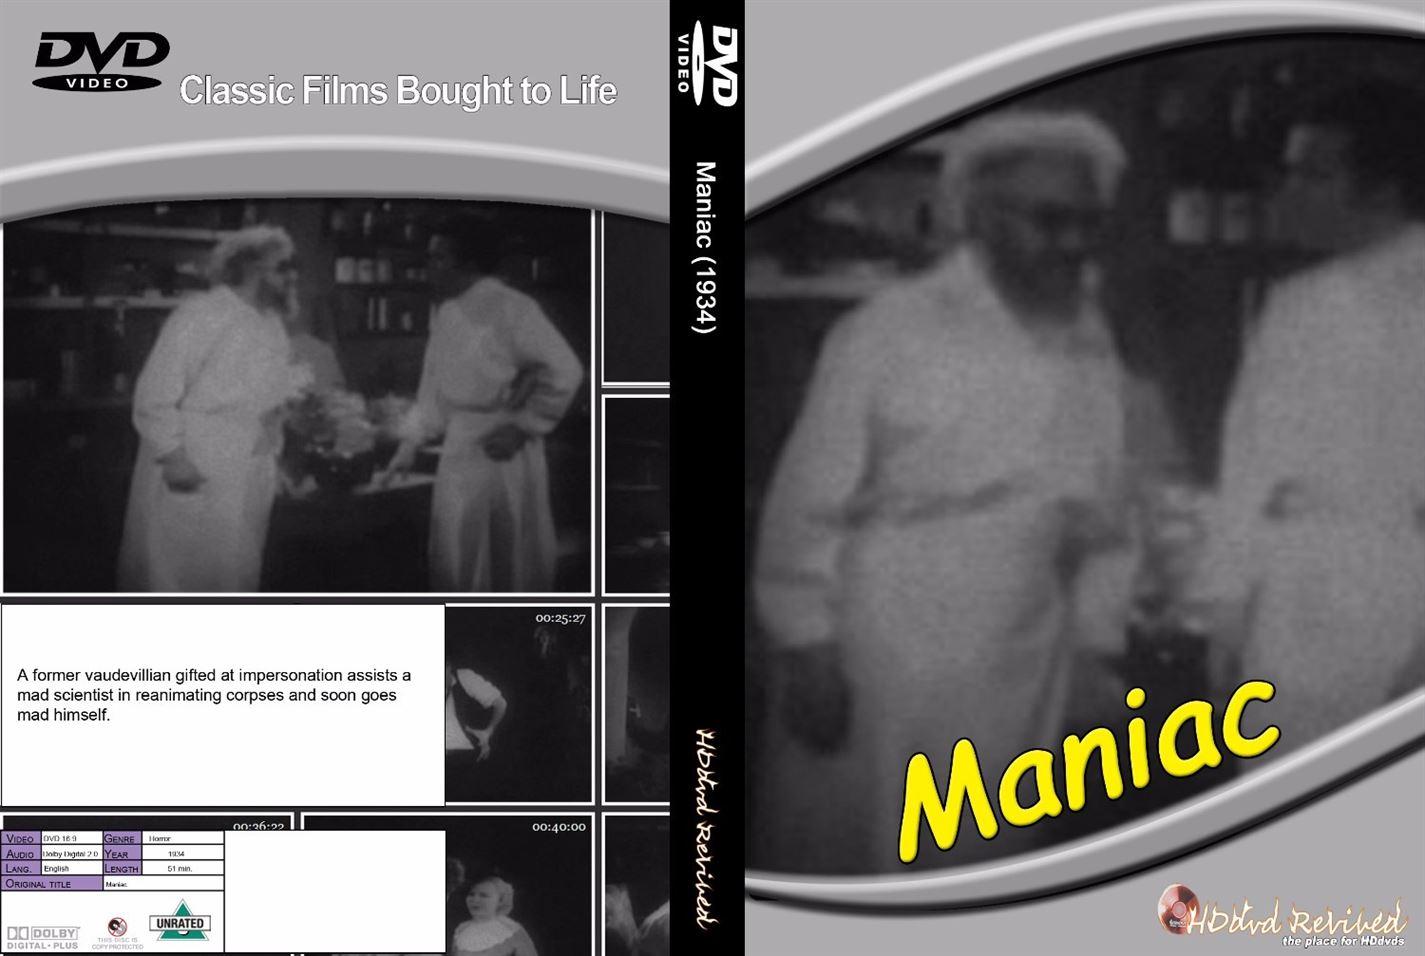 Maniac (1934) - HDDVD - (HDDVD-Revived) - NEW  - UK SELLER